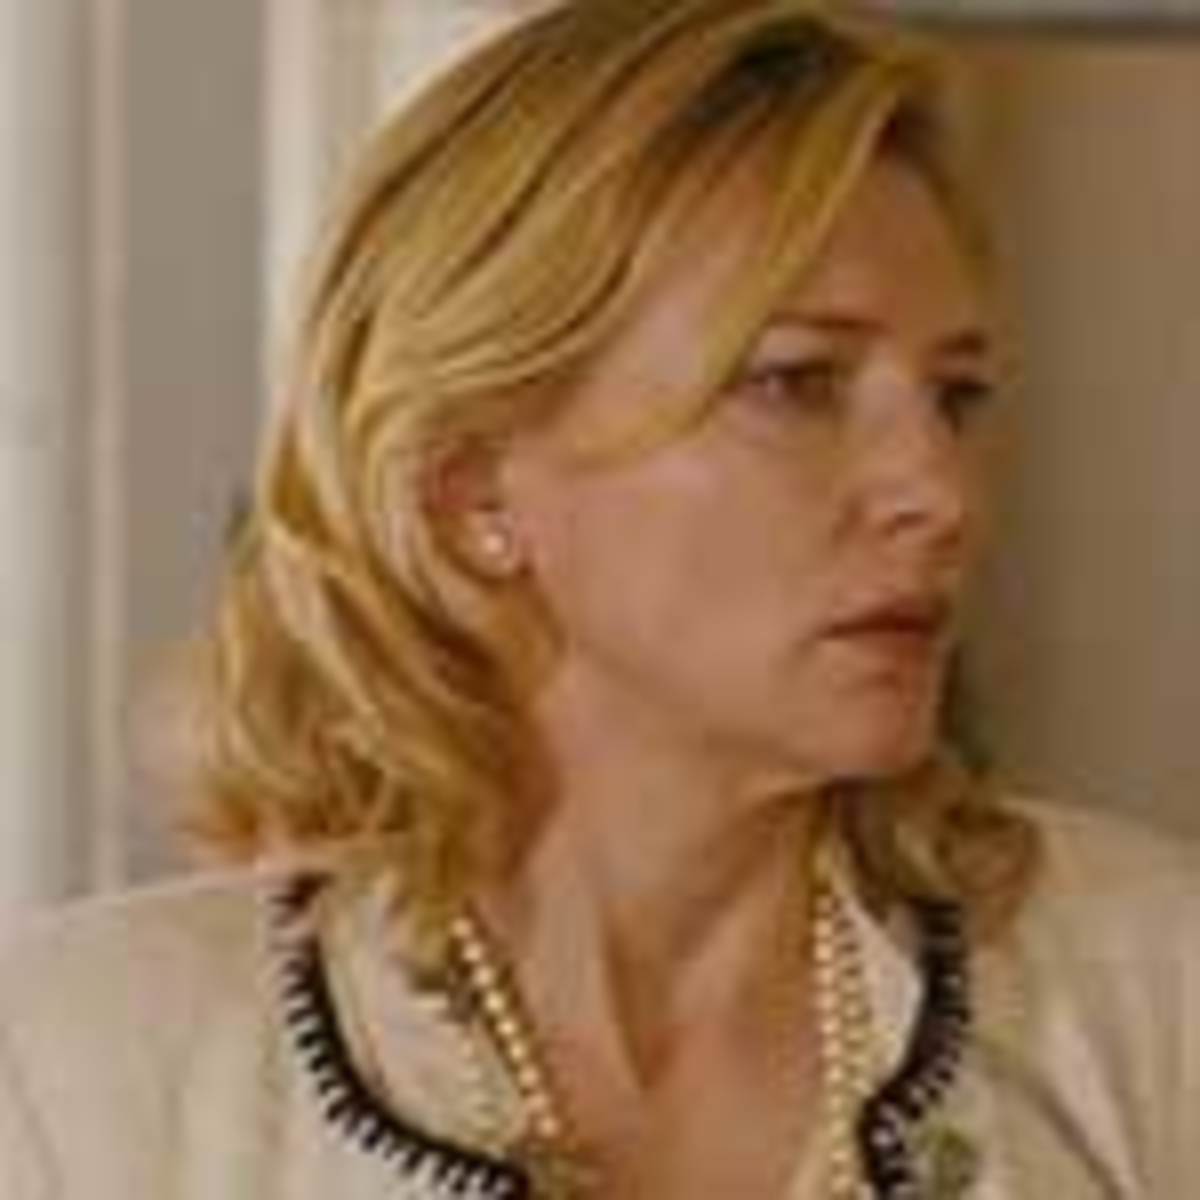 I loved Cate Blanchett's character's style in Blue Jasmine, but I